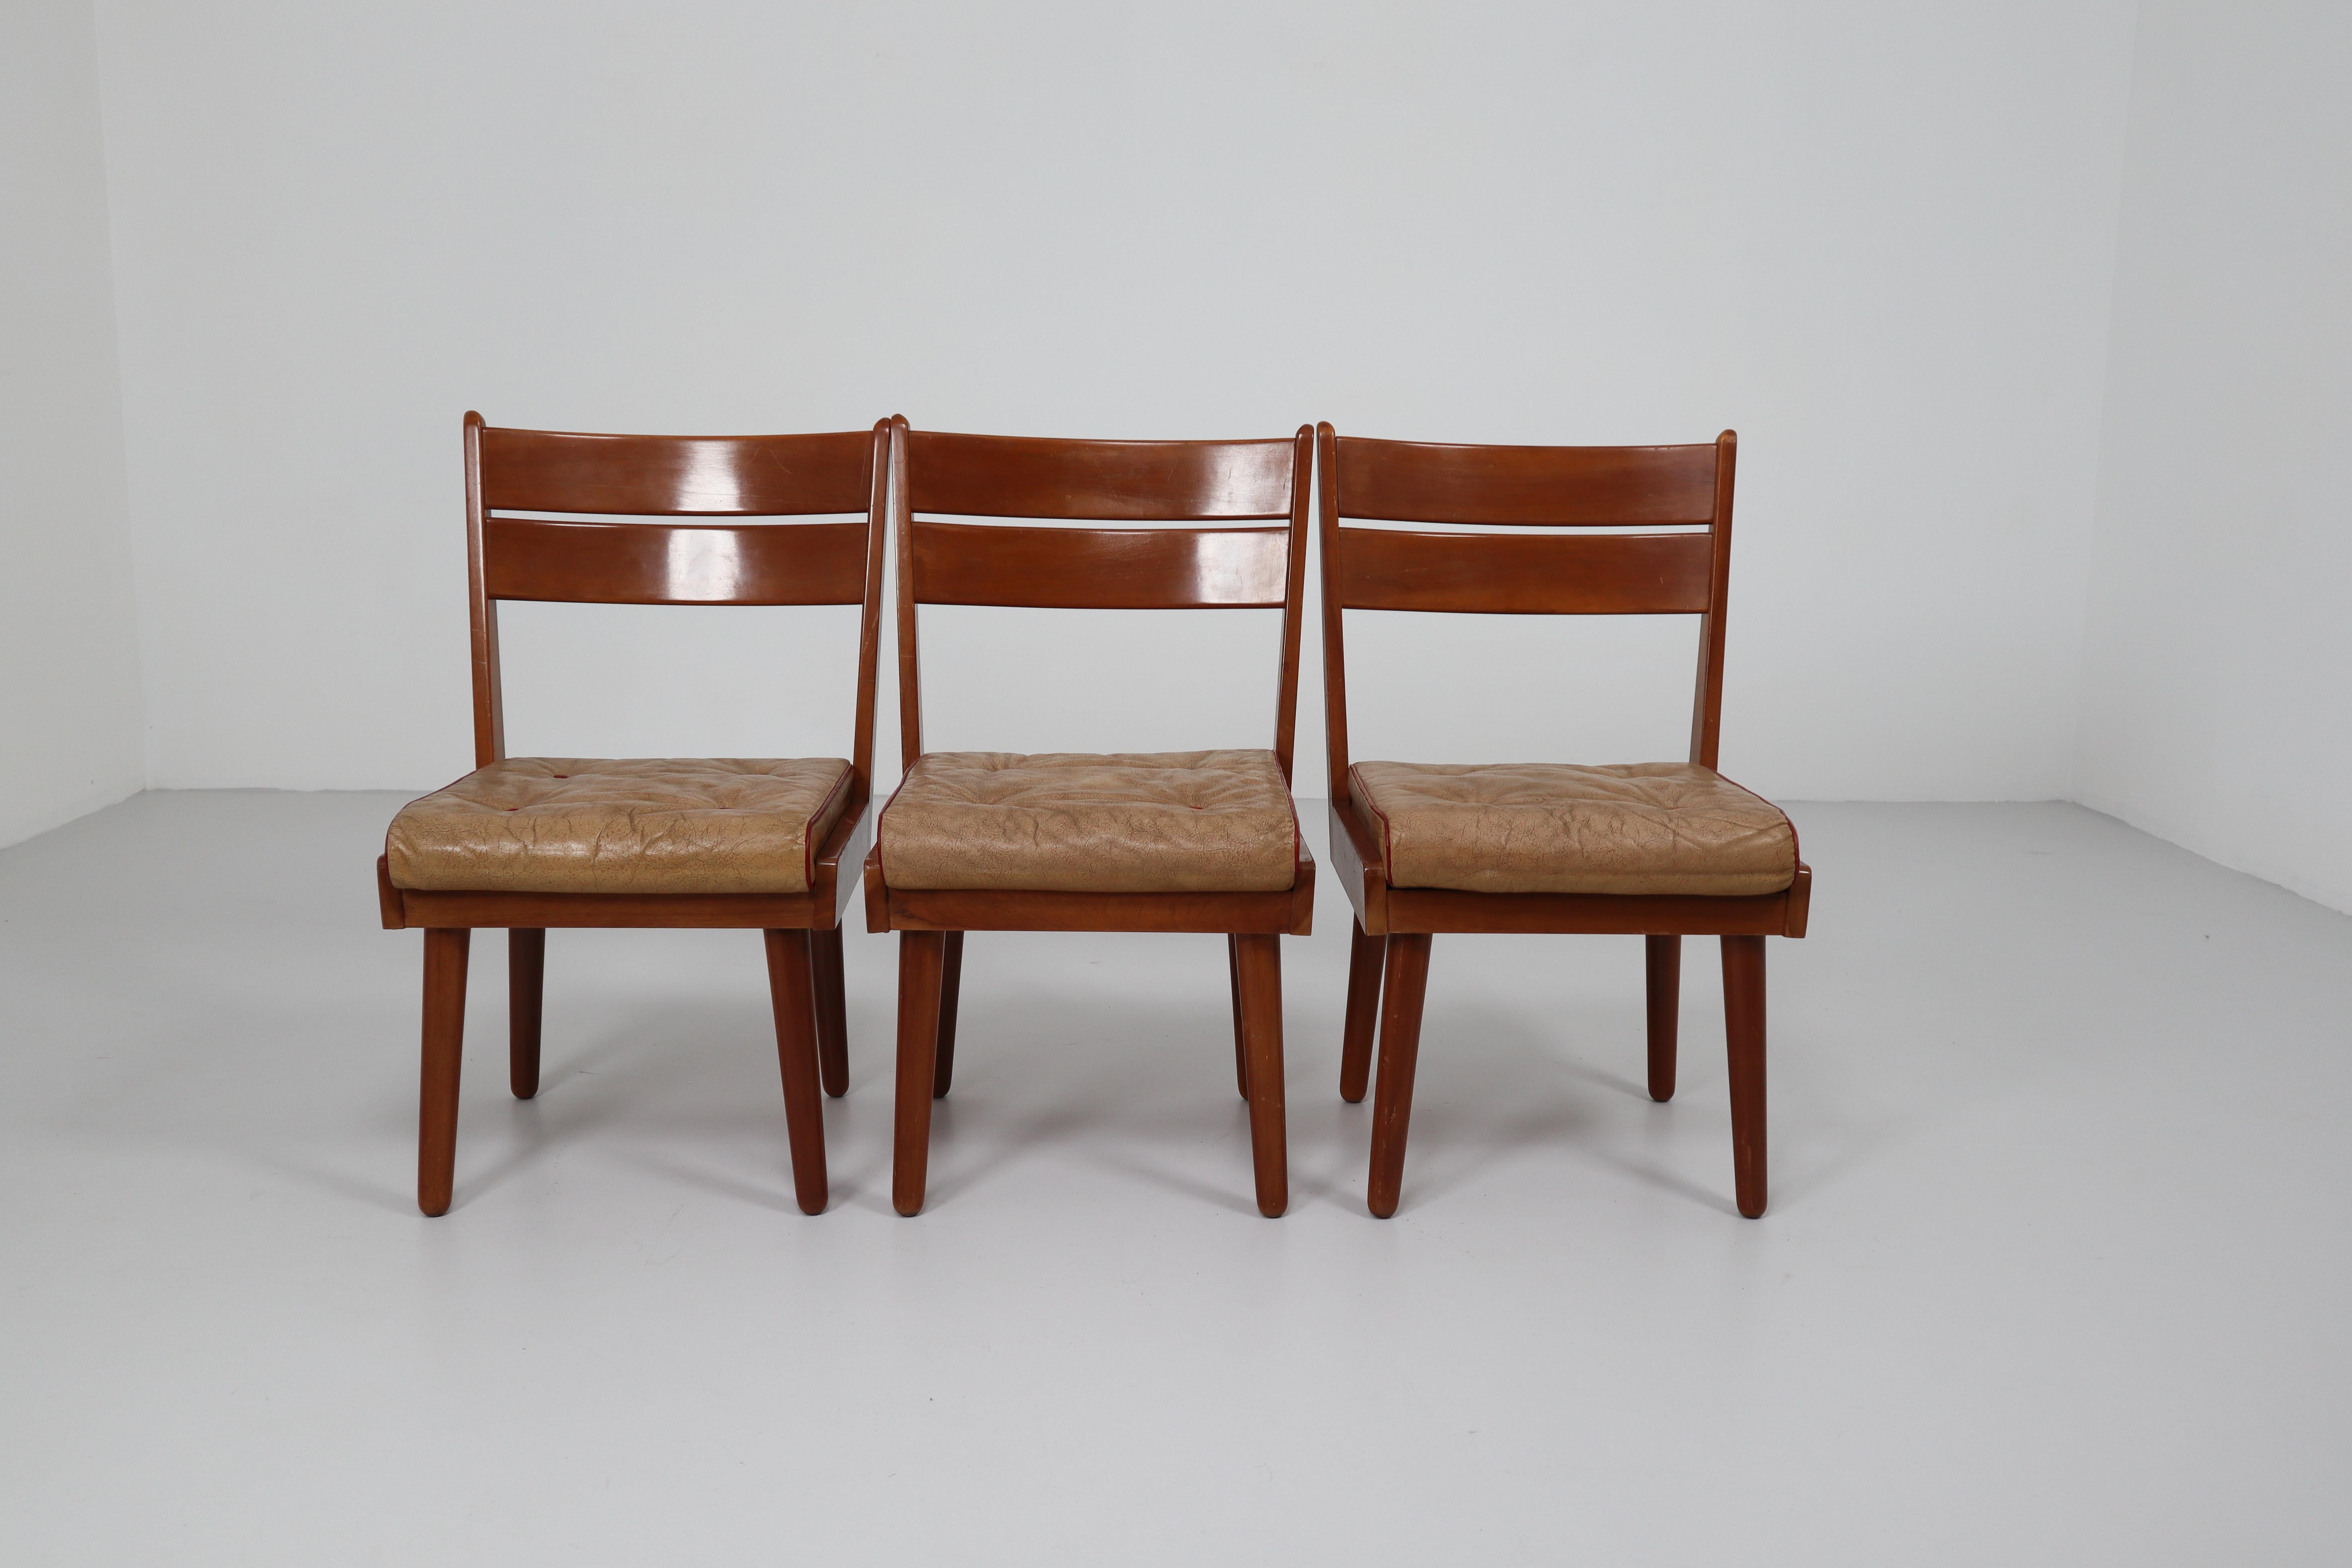 Midcentury Chairs in Walnut and Leather, Austria, 1950s 2